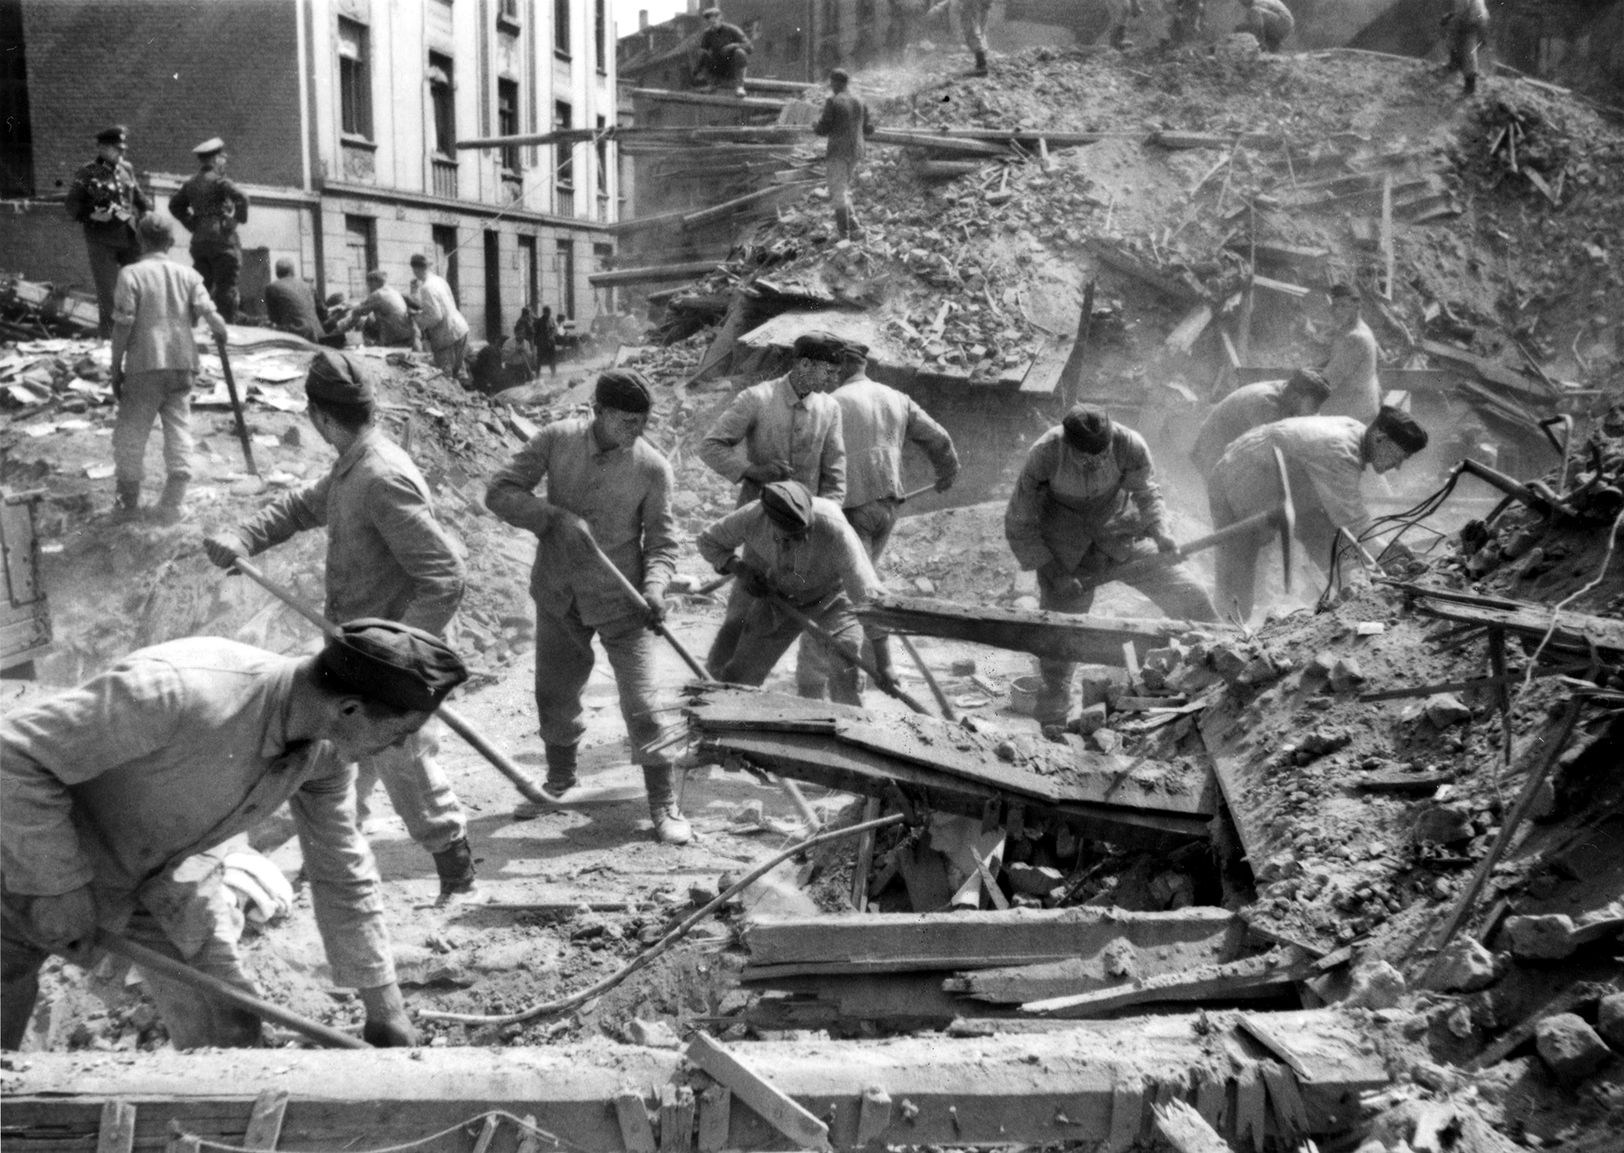 Military personnel detailed to clear rubble from the streets of Cologne labor to complete the task after one of many Allied air raids against the city during World War II. A total of 898 RAF bombers actually reached Cologne during the 1,000-plane raid, but despite widespread destruction the productivity of area factories was slowed only for a month.